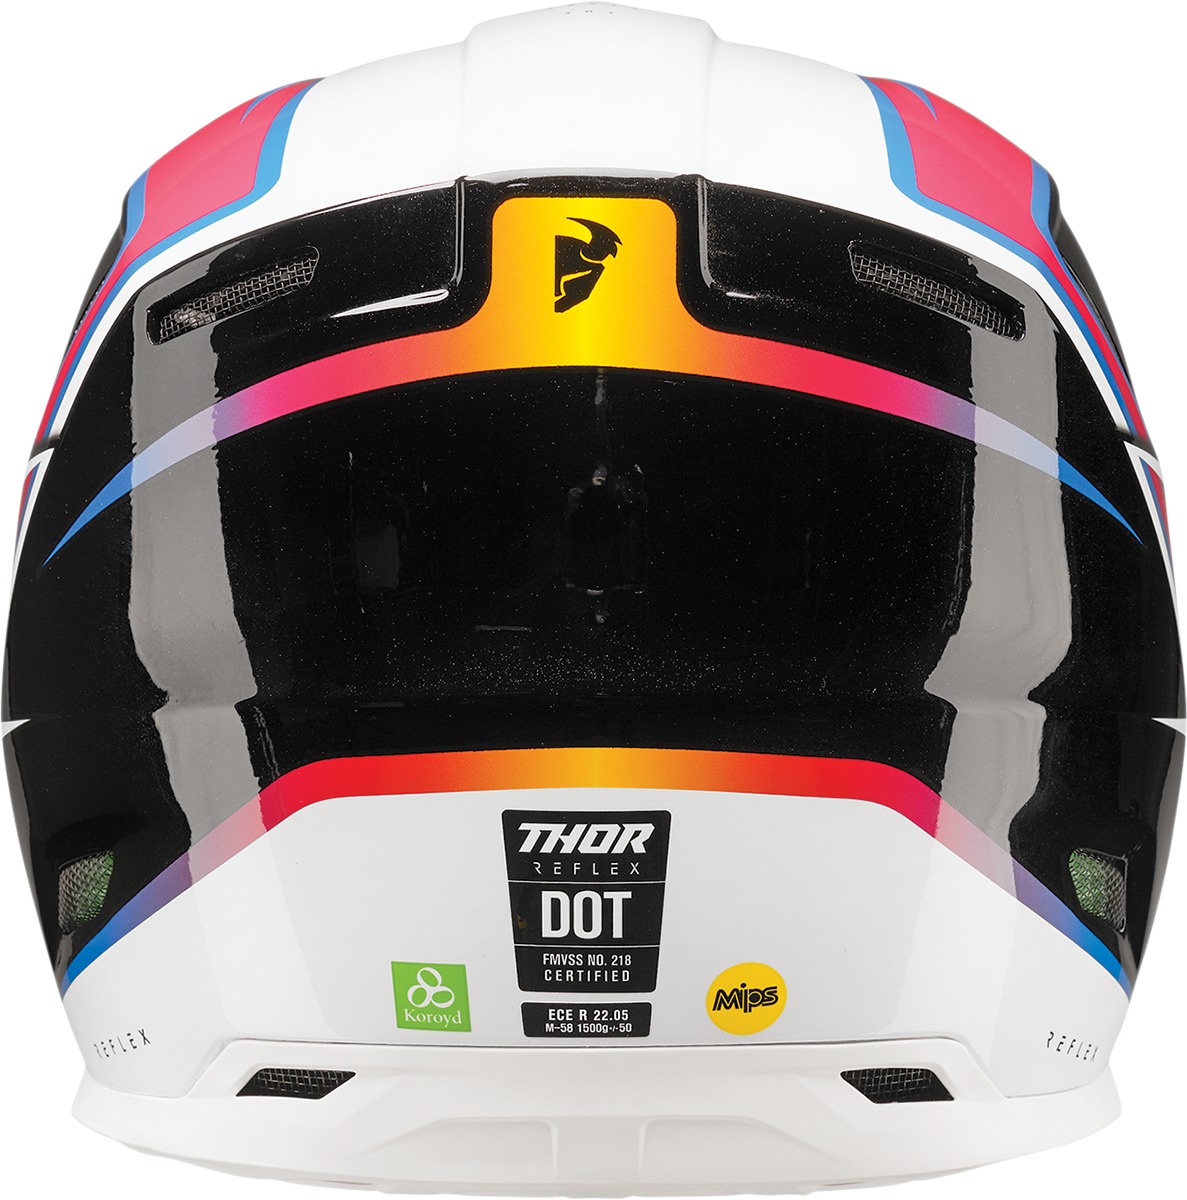 Reflex Accel MIPS Full Face Offroad Helmet Gloss Multi X-Large - Click Image to Close